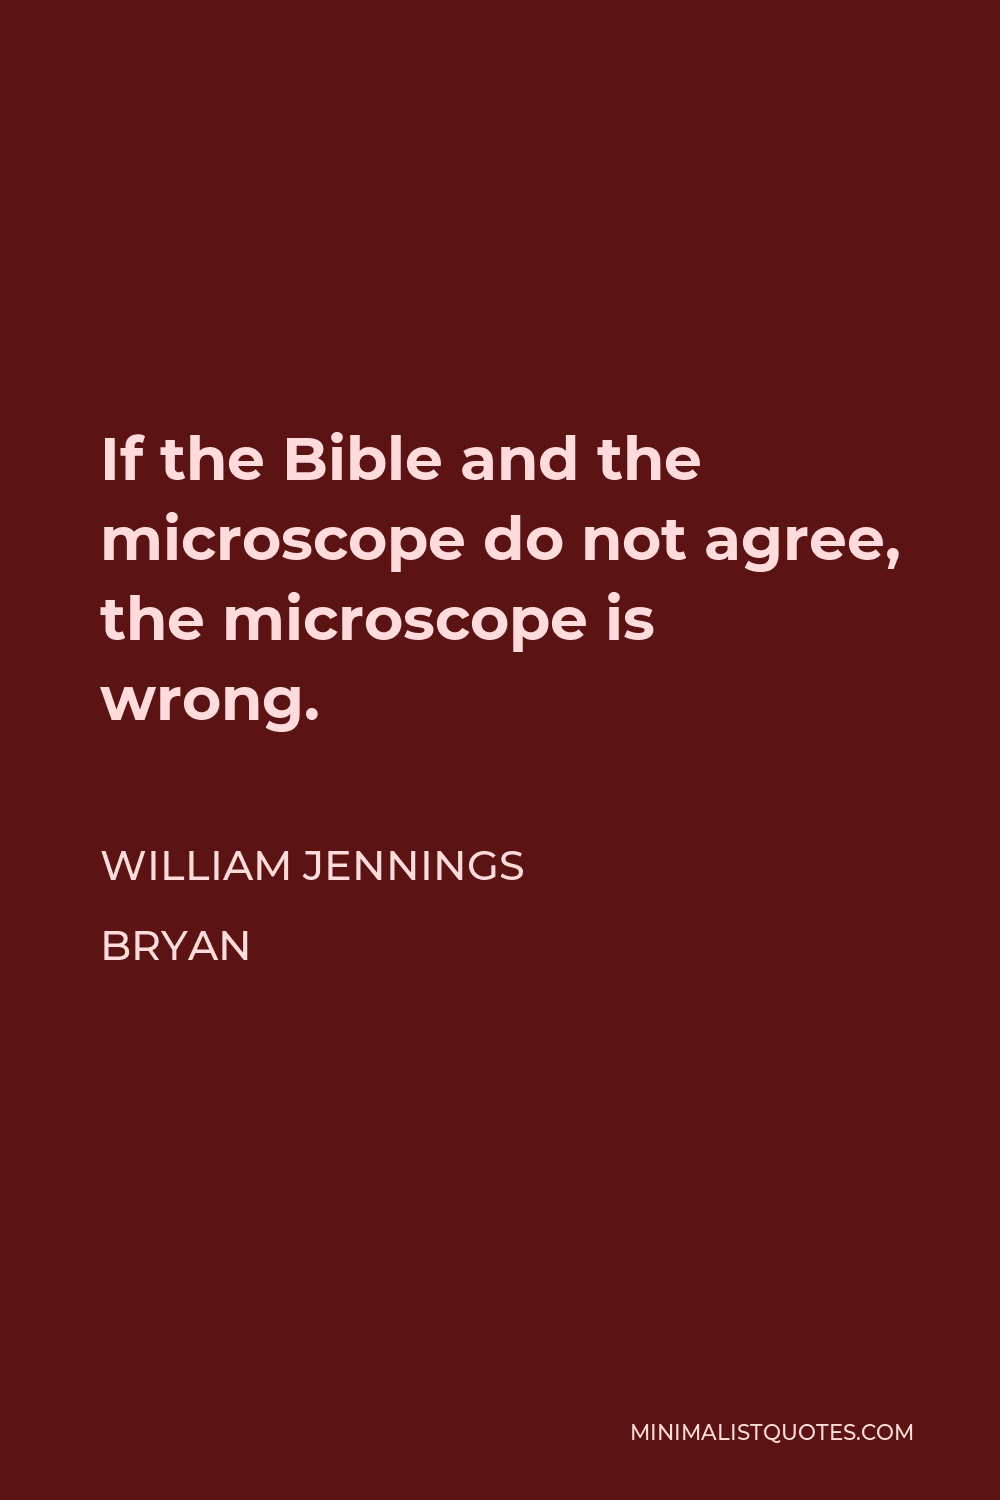 William Jennings Bryan Quote - If the Bible and the microscope do not agree, the microscope is wrong.